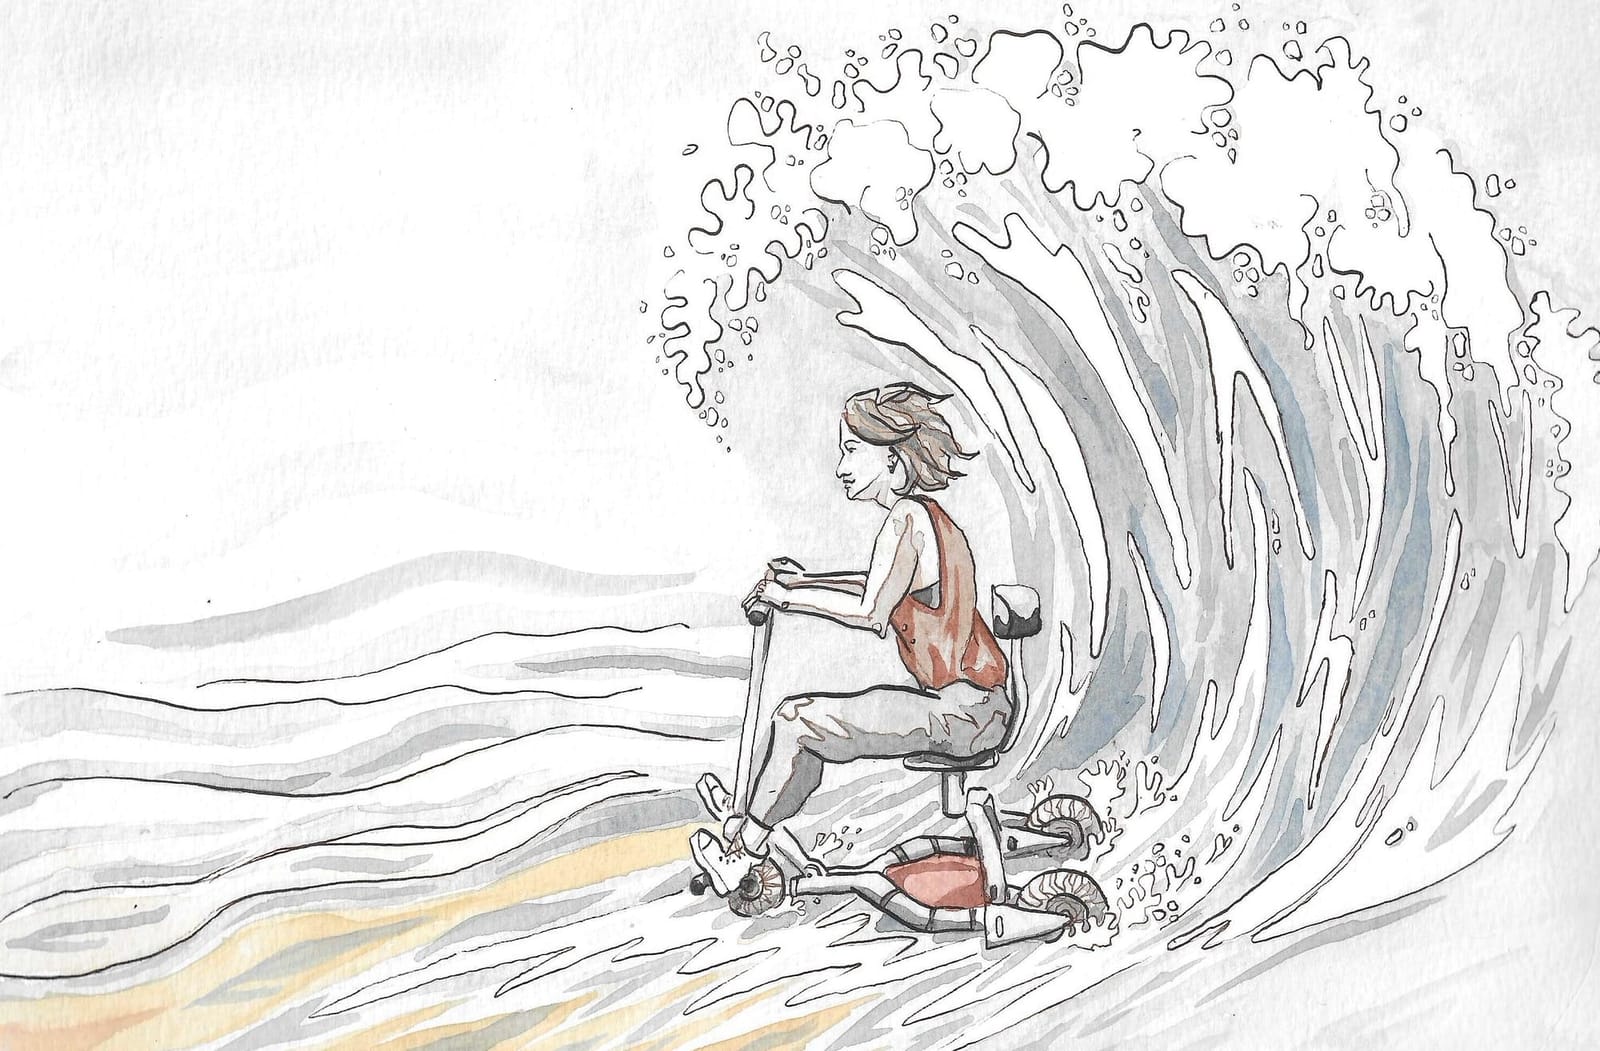 Illustration of Celestine, a white woman with short hair, riding a three-wheeled mobility scooter through an ocean wave.